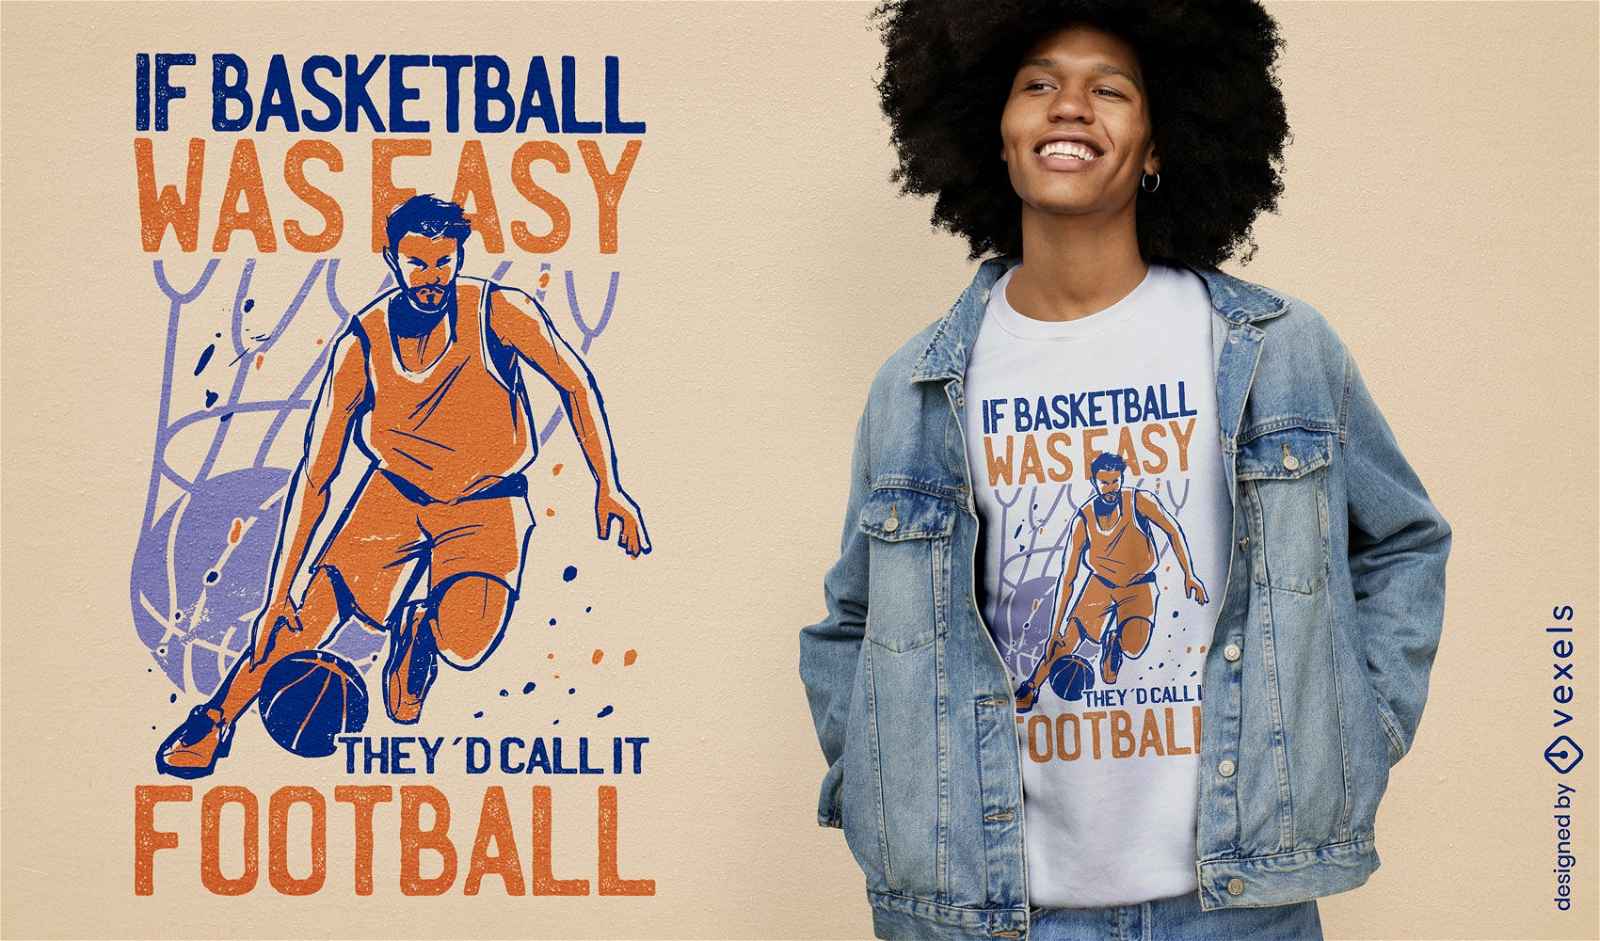 Basketball funny quote t-shirt design